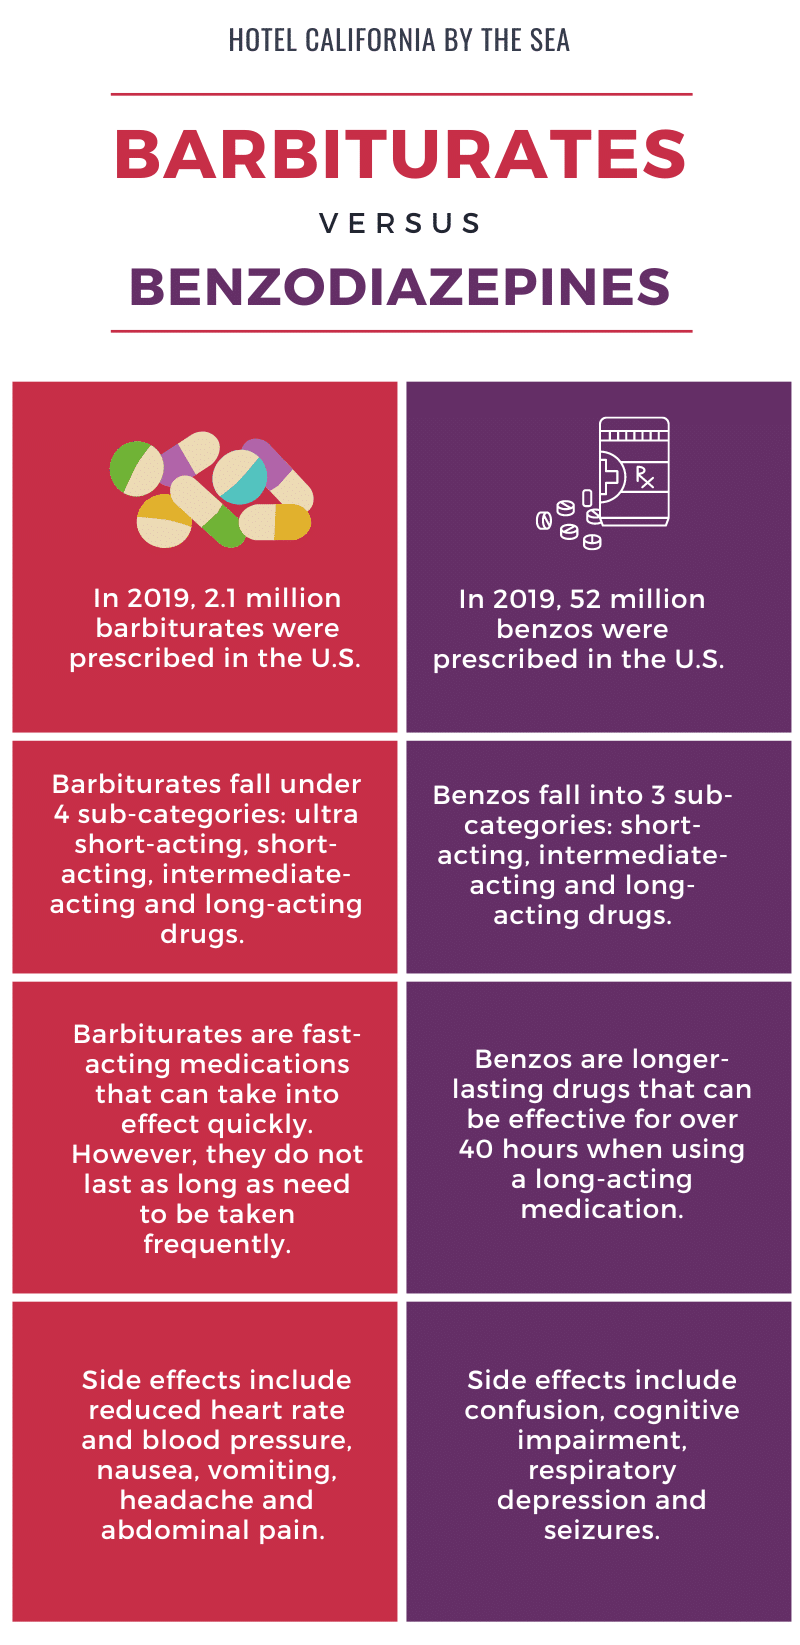 A purple and pink infographic compares the similarities and differences between barbiturates and benzodiazepines.